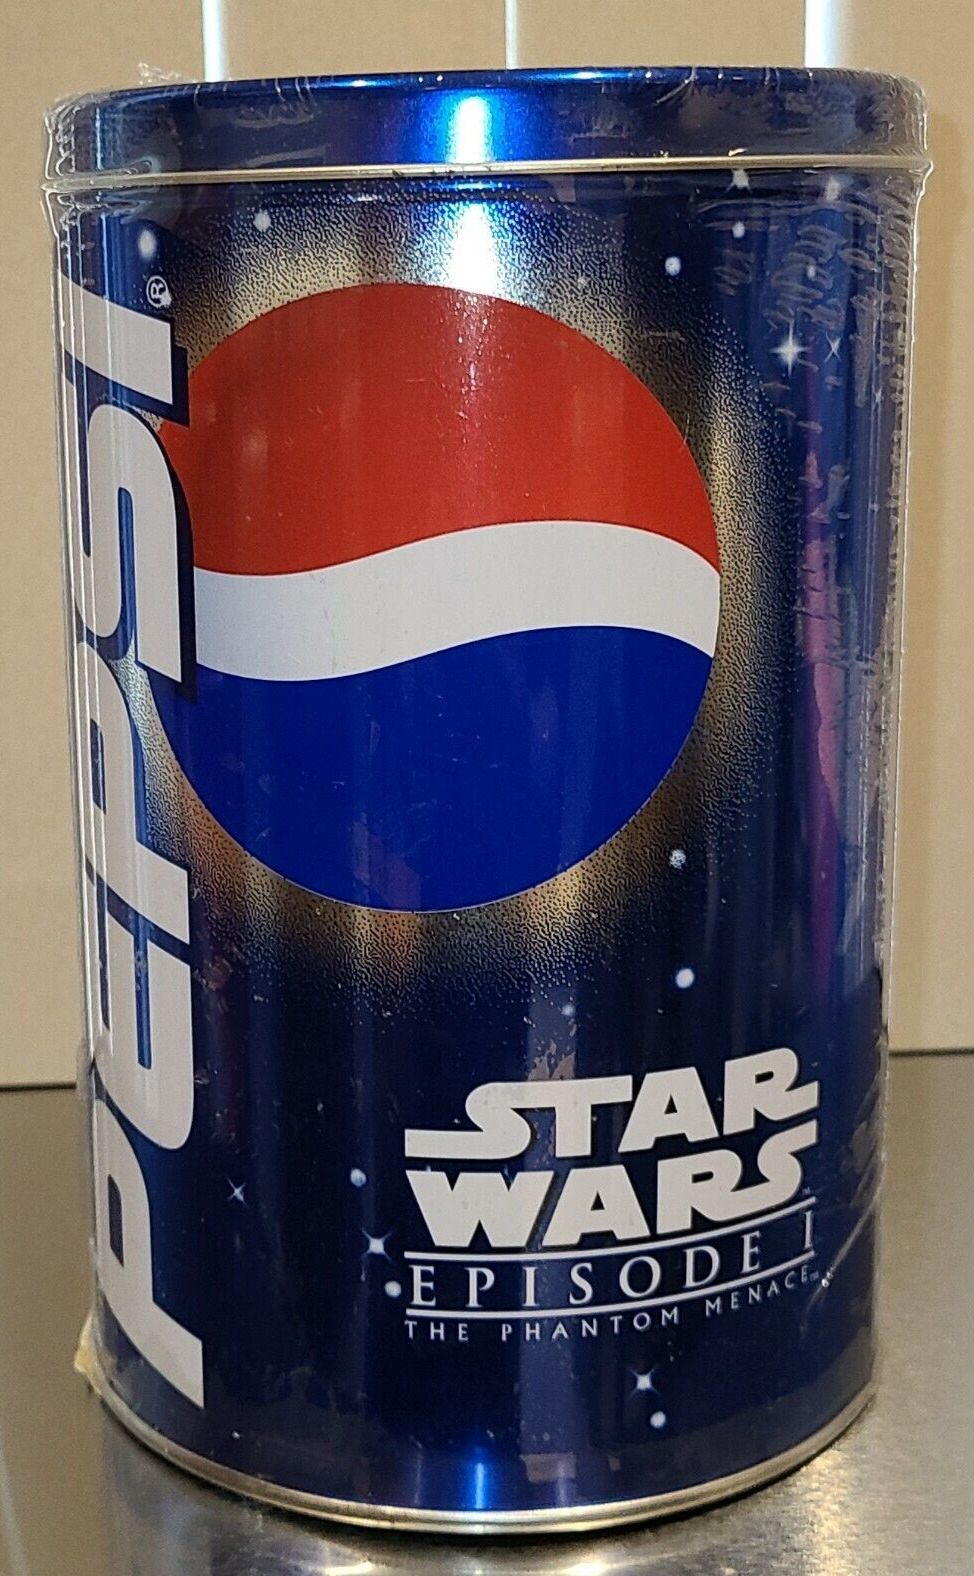 New Star Wars Cracker Jack Large Pepsi Collectors Canister + Mouse Pad Sealed